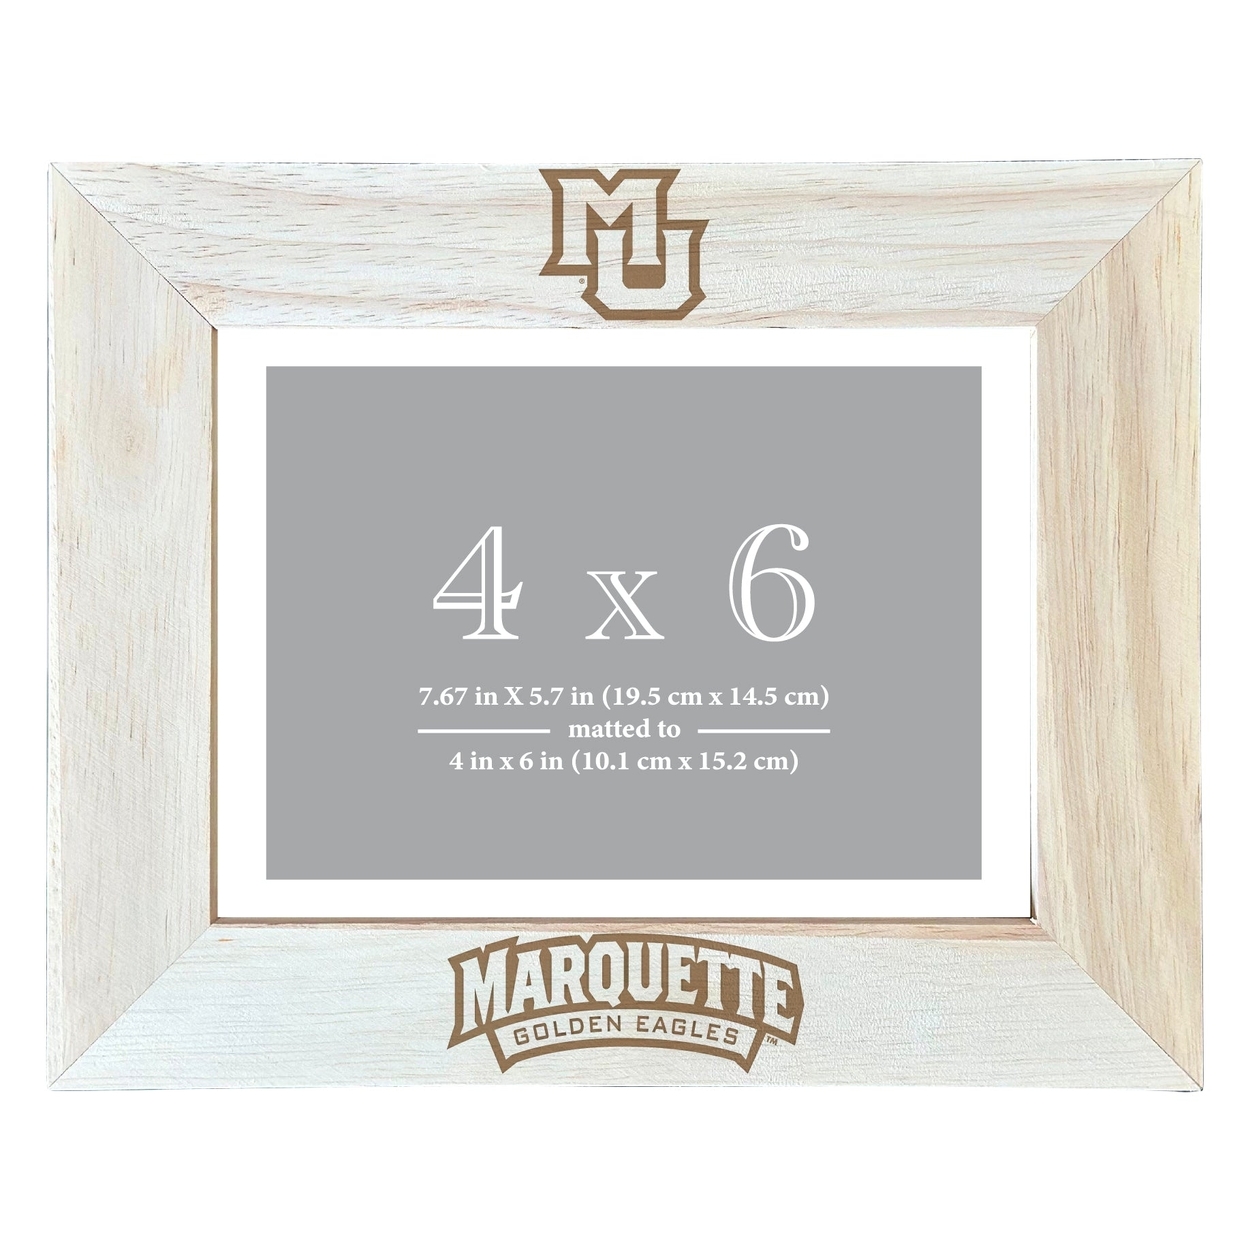 Marquette Golden Eagles Wooden Photo Frame Matted To 4 X 6 Inch - Etched